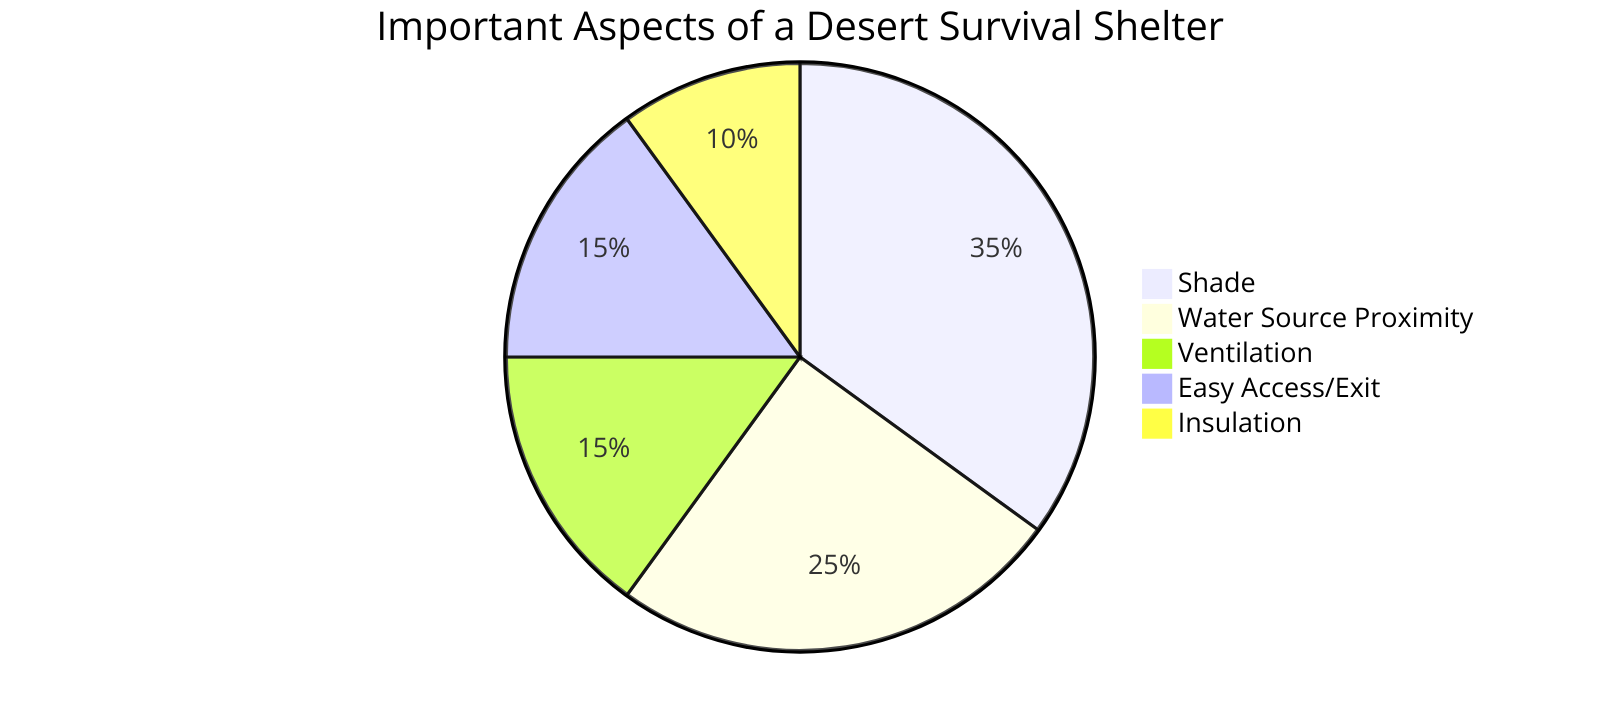  the more important aspects of a desert survival shelter